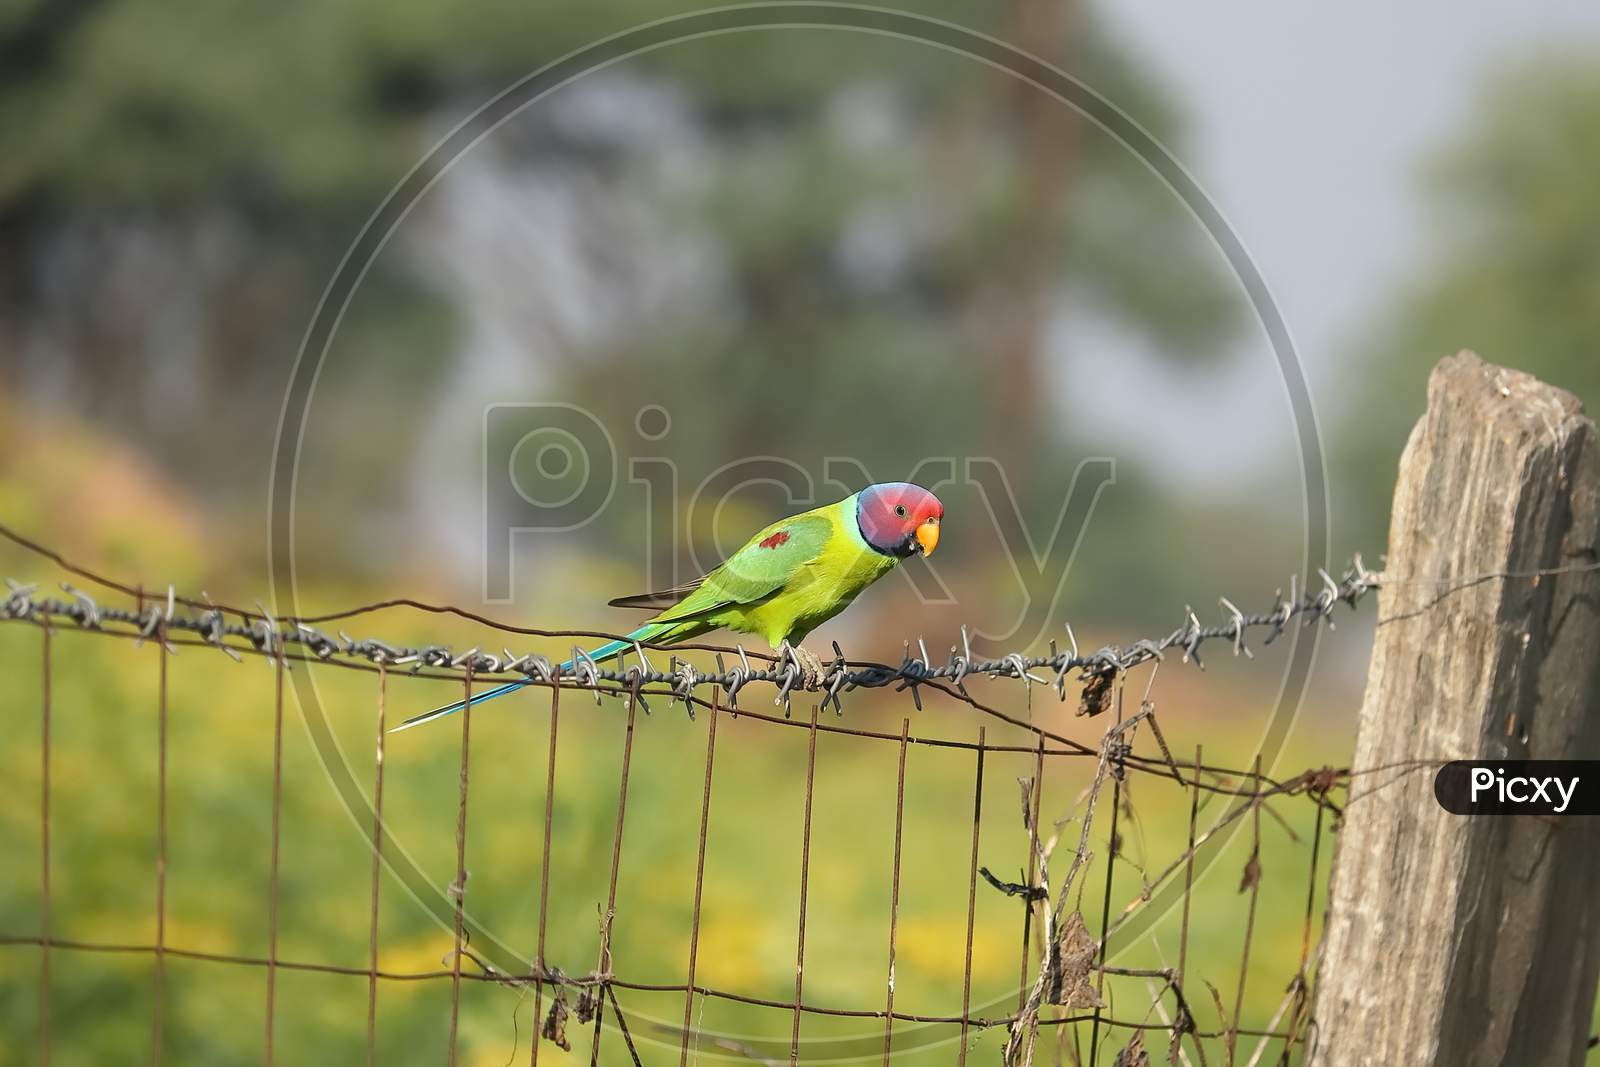 A Red Headed Parrot Sitting On Net